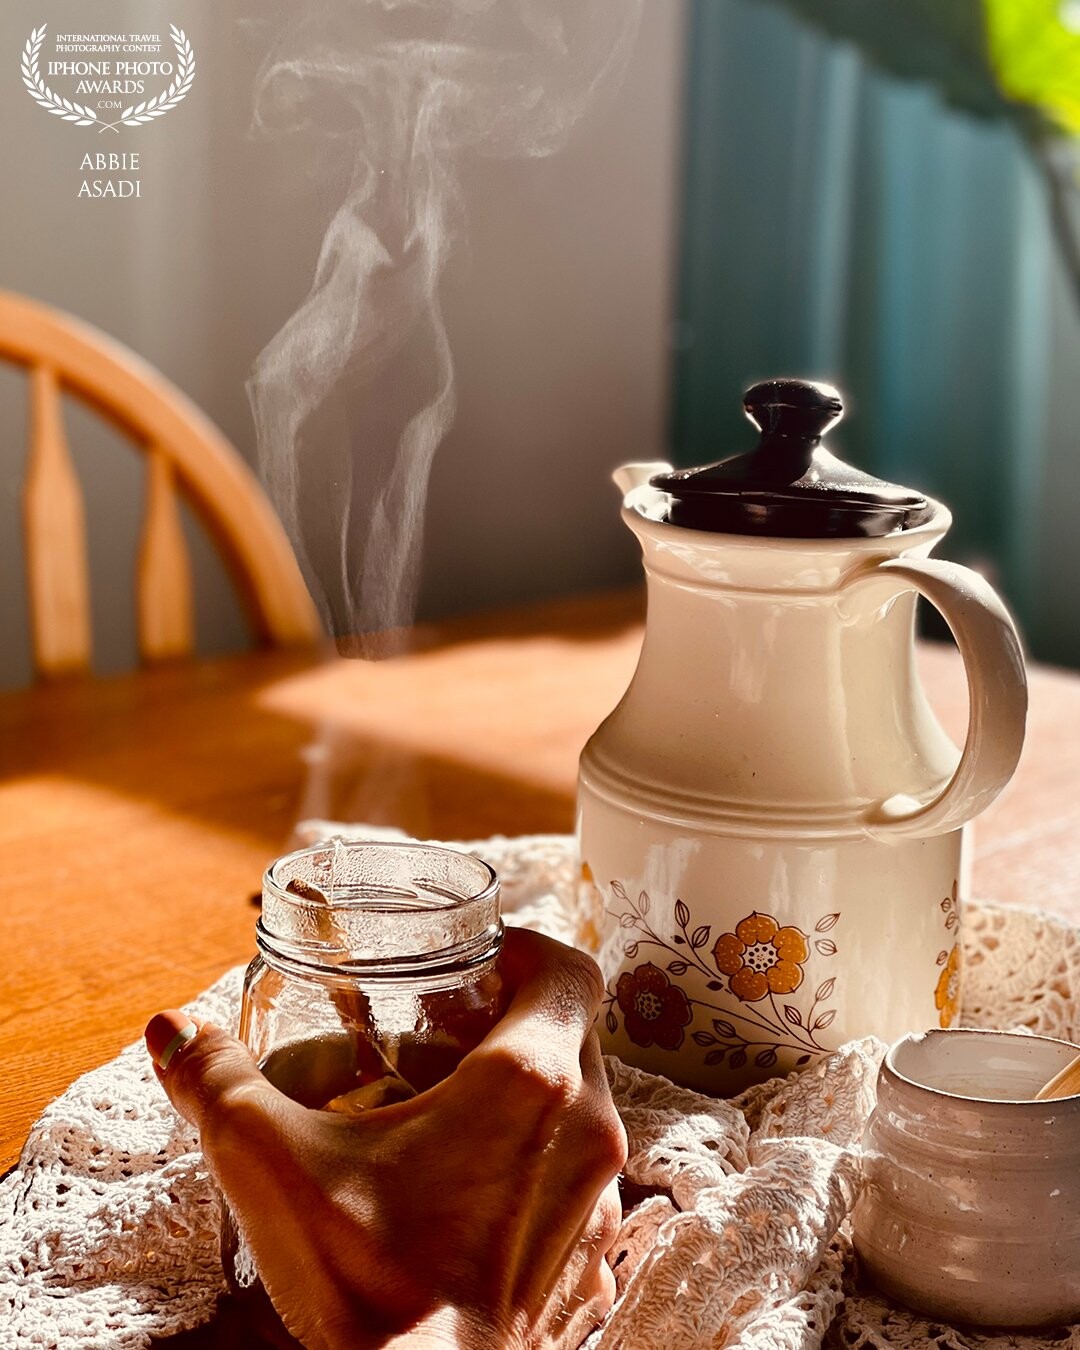 From a photo shoot with a gorgeous individual for whom we were promoting her wellness teas and couldn’t help but capture the rise of the steam from the hot drink into the beautiful light.